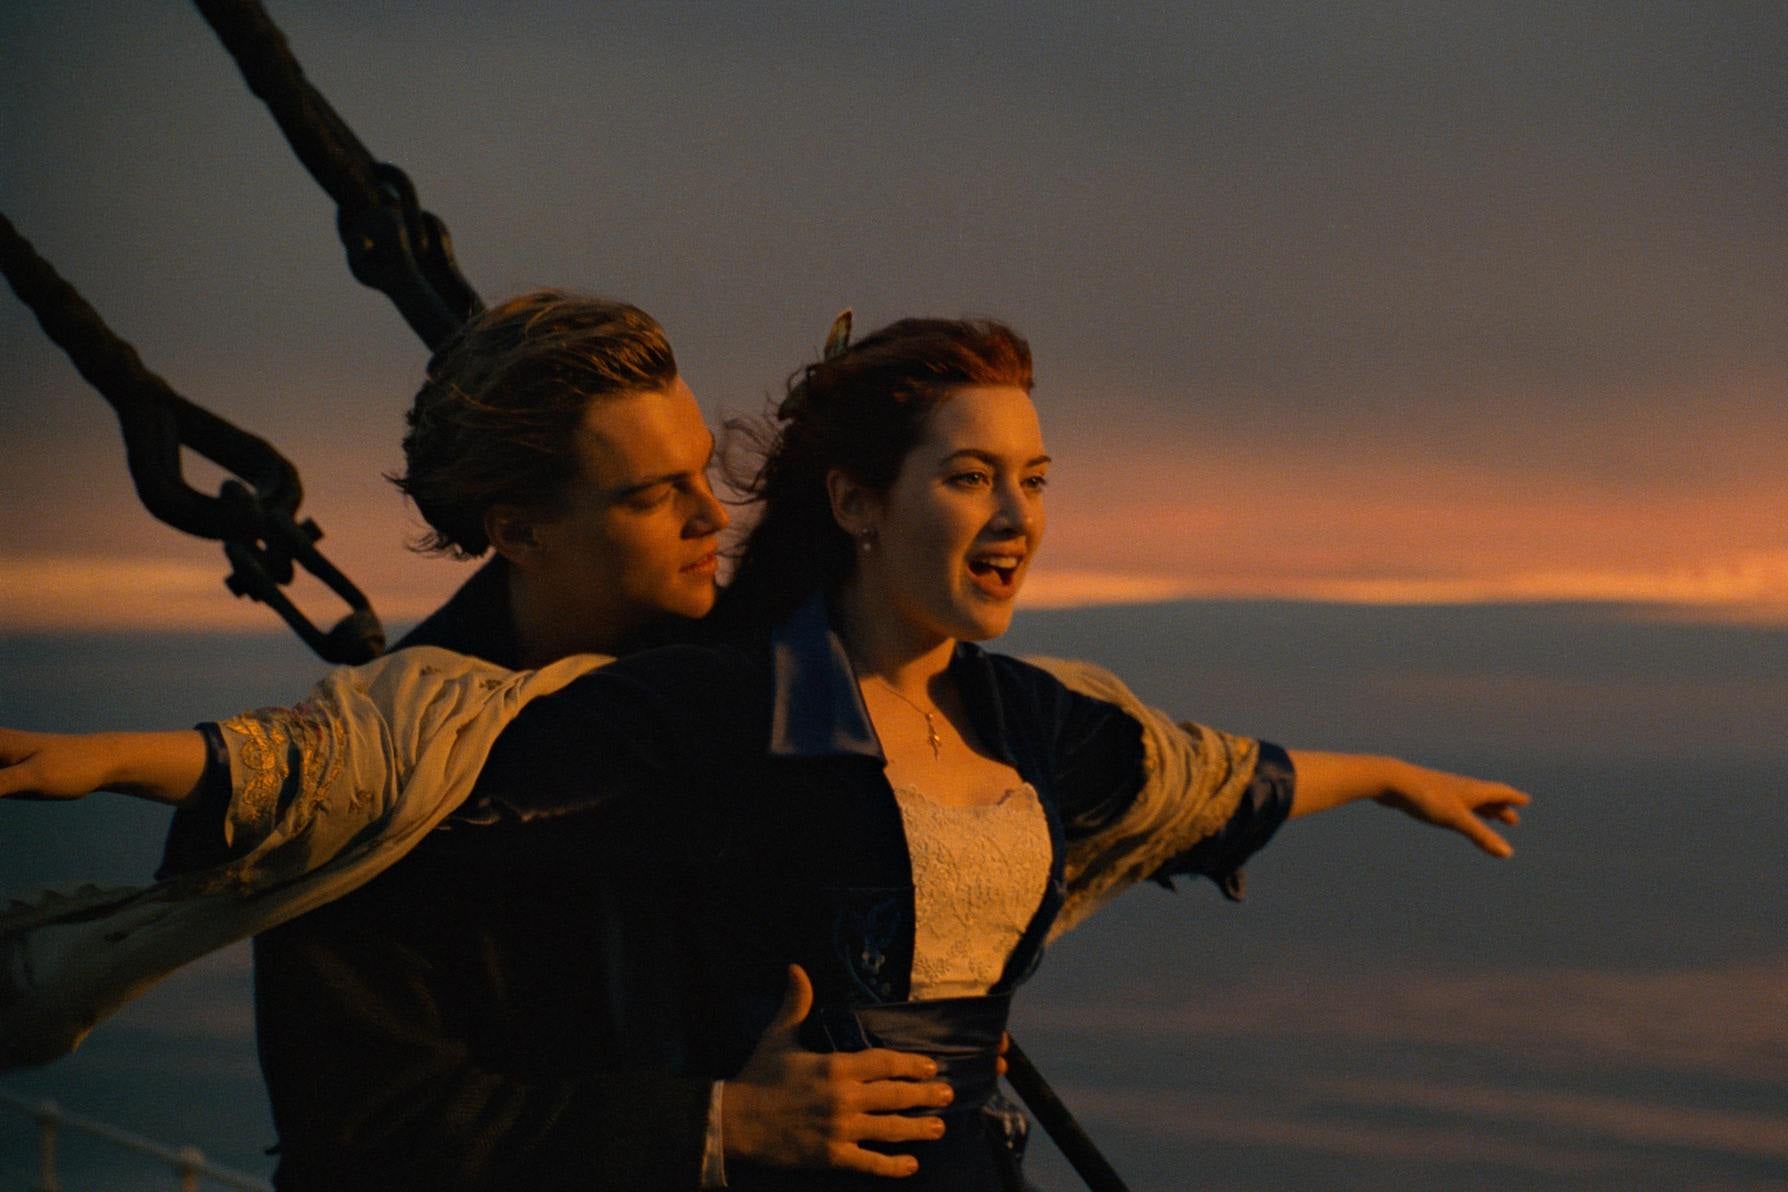 At sunset, Leonardo DiCaprio as Jack holds the waist of Kate Winslet as Rose as she stands at the front of a ship with her arms out at her sides and an exhilarated expression on her face.